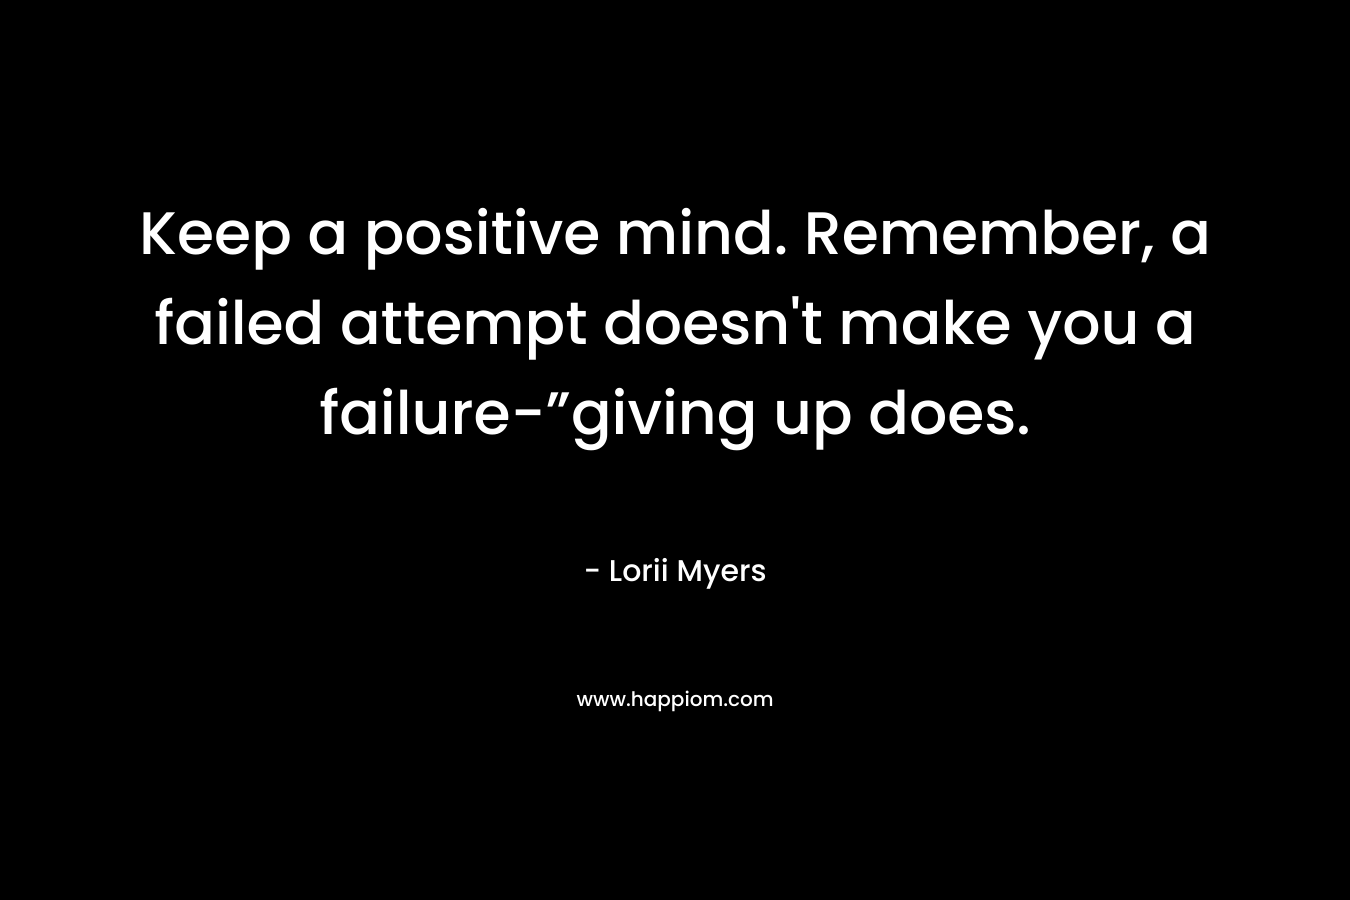 Keep a positive mind. Remember, a failed attempt doesn't make you a failure-”giving up does.